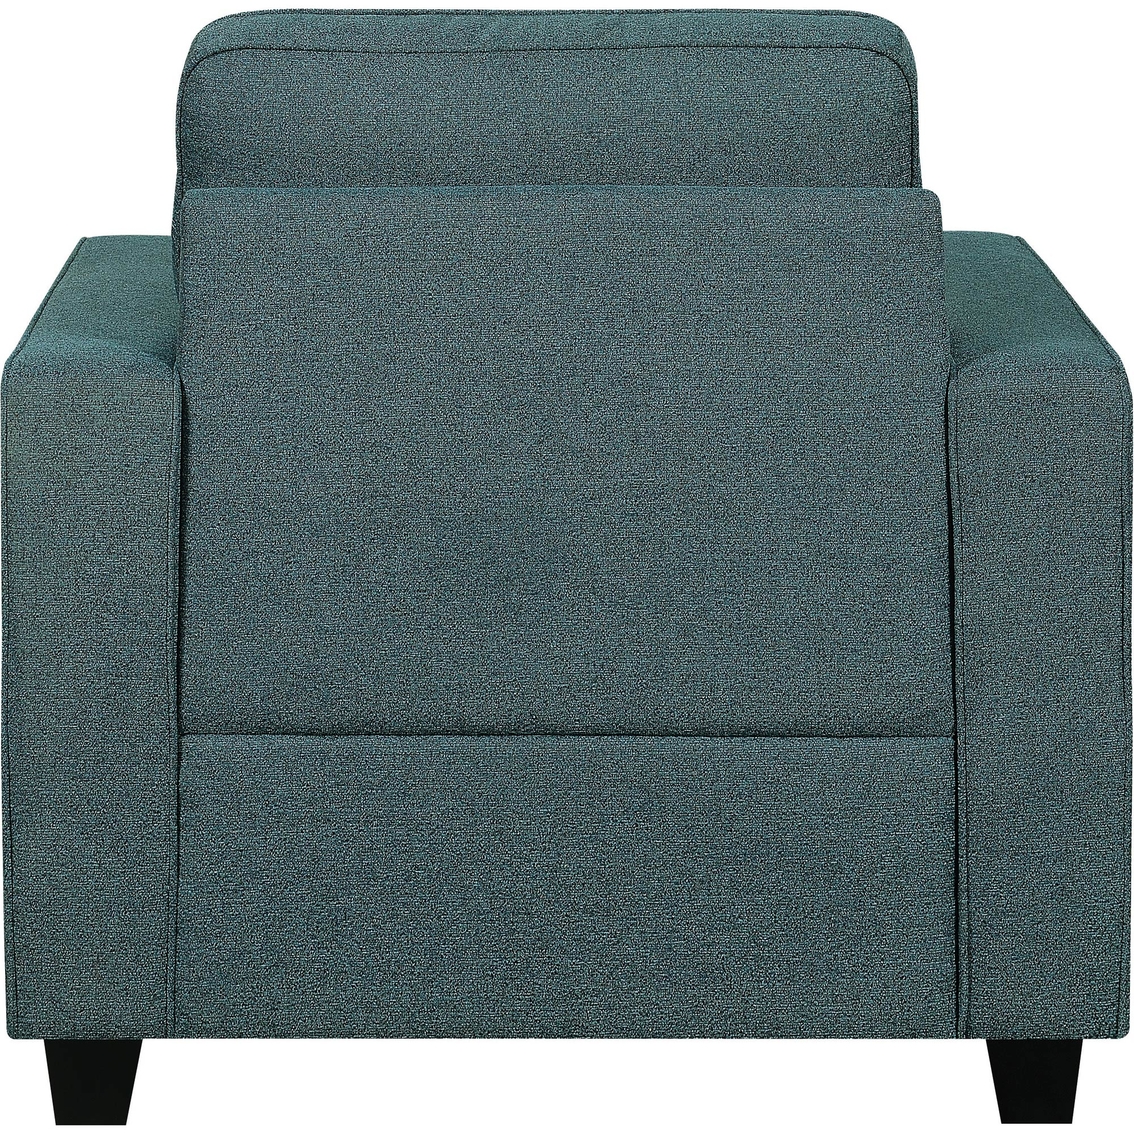 Scott Living Brownswood Transitional Loveseat with Track Arms - Image 2 of 4